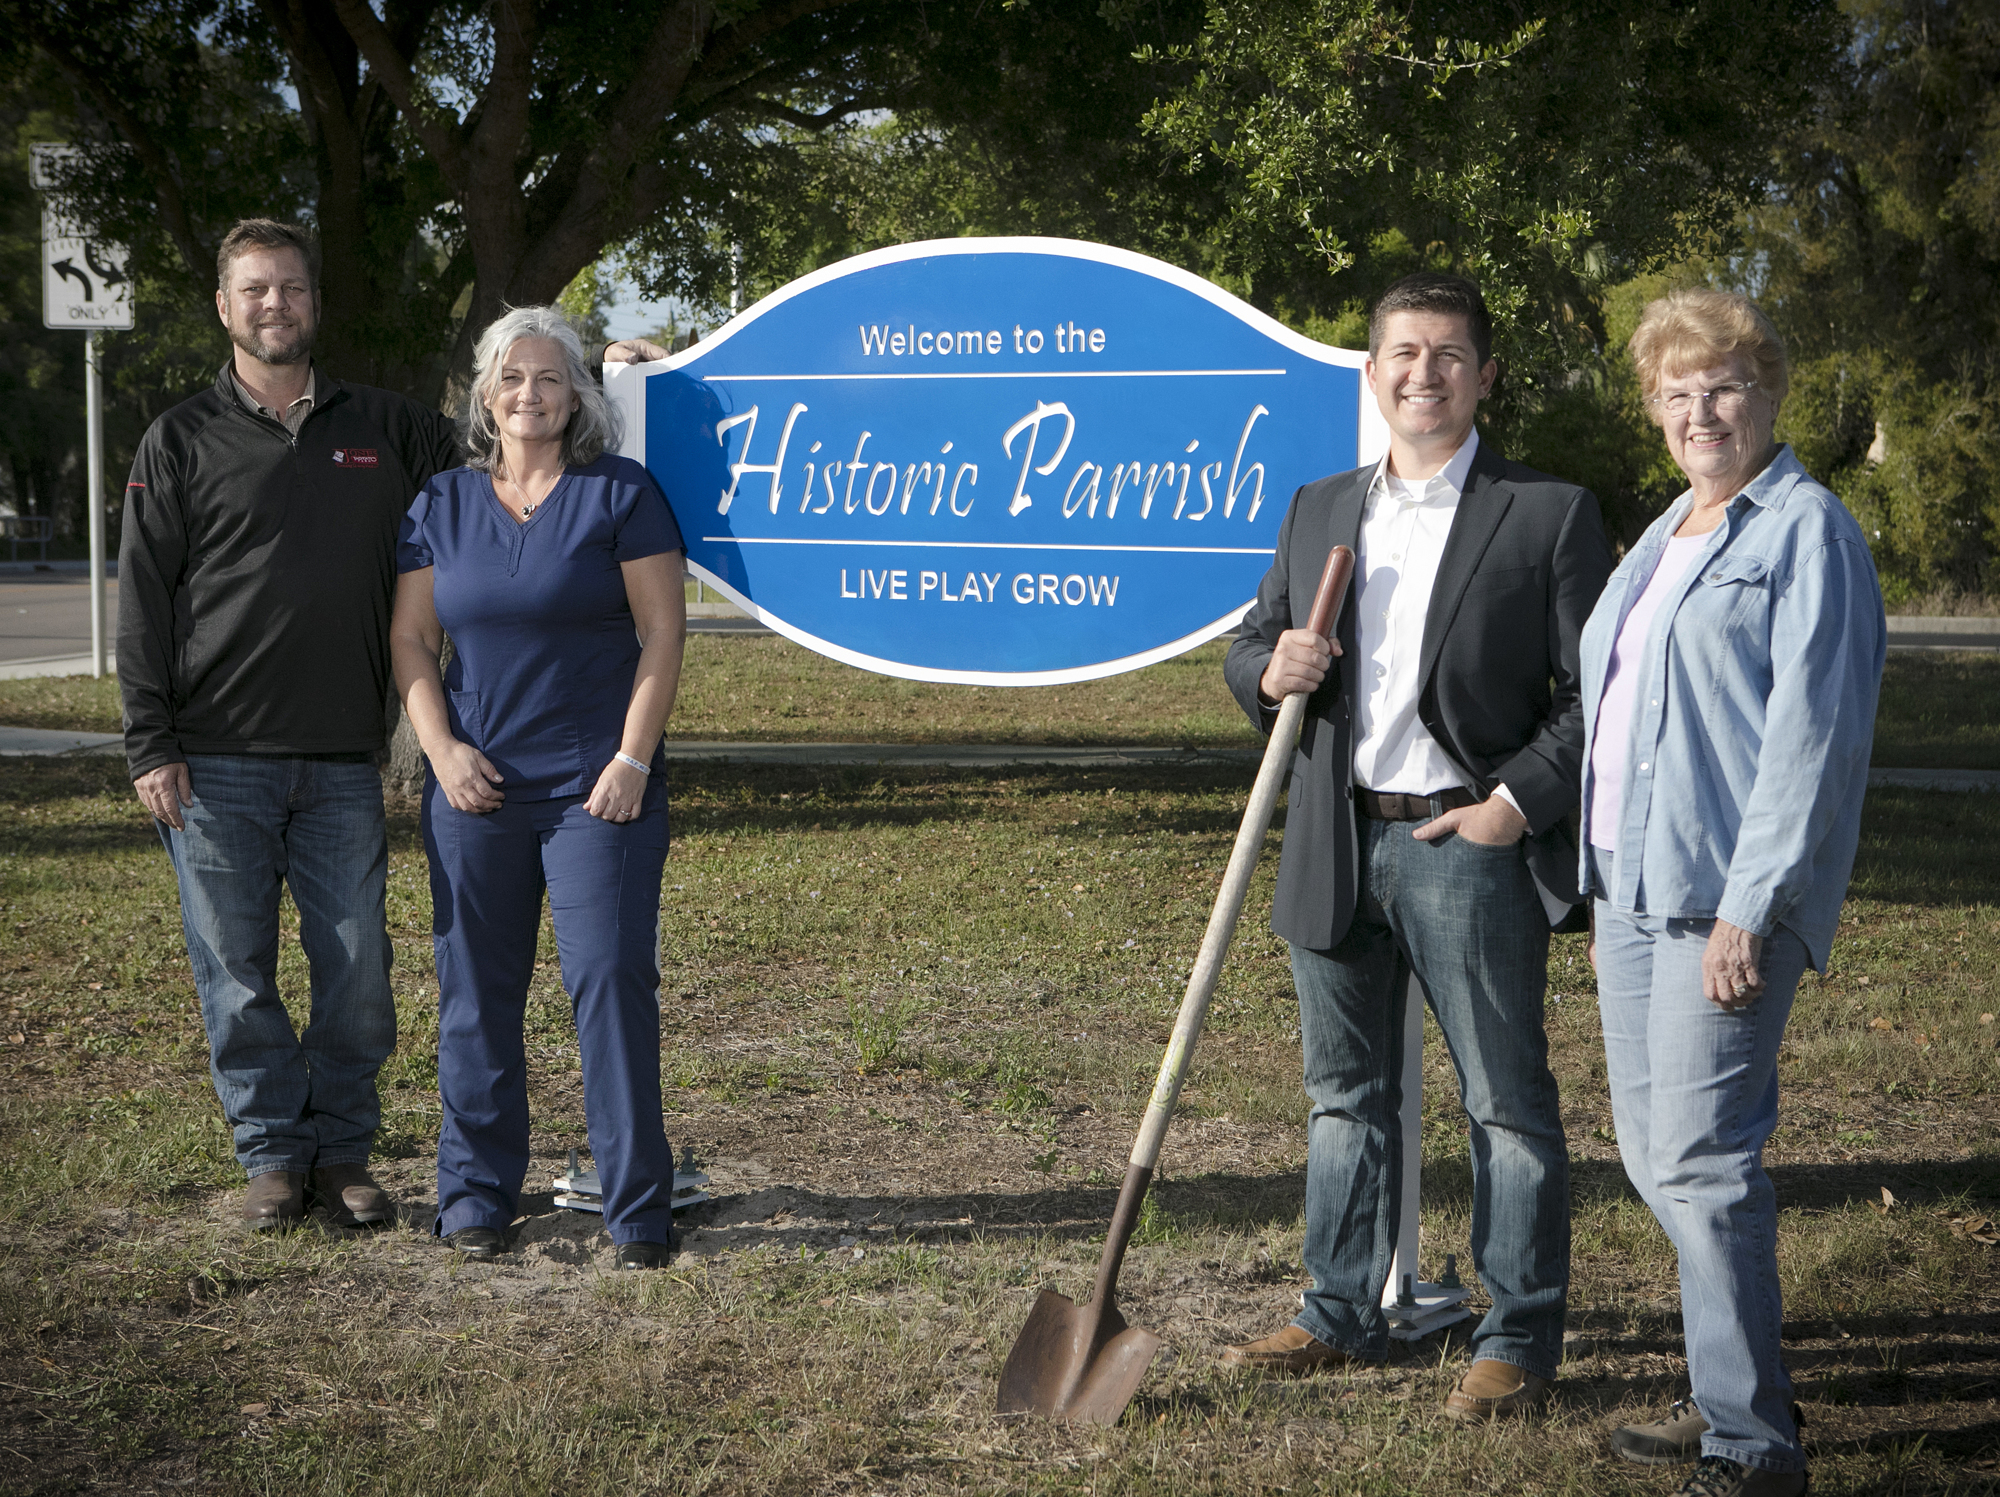 Mark Wemple. The Rural Development Committee in Parrish includes, from left to right, Alan Jones, Gretchen Fowler, Evan Guido and Norma Kennedy.